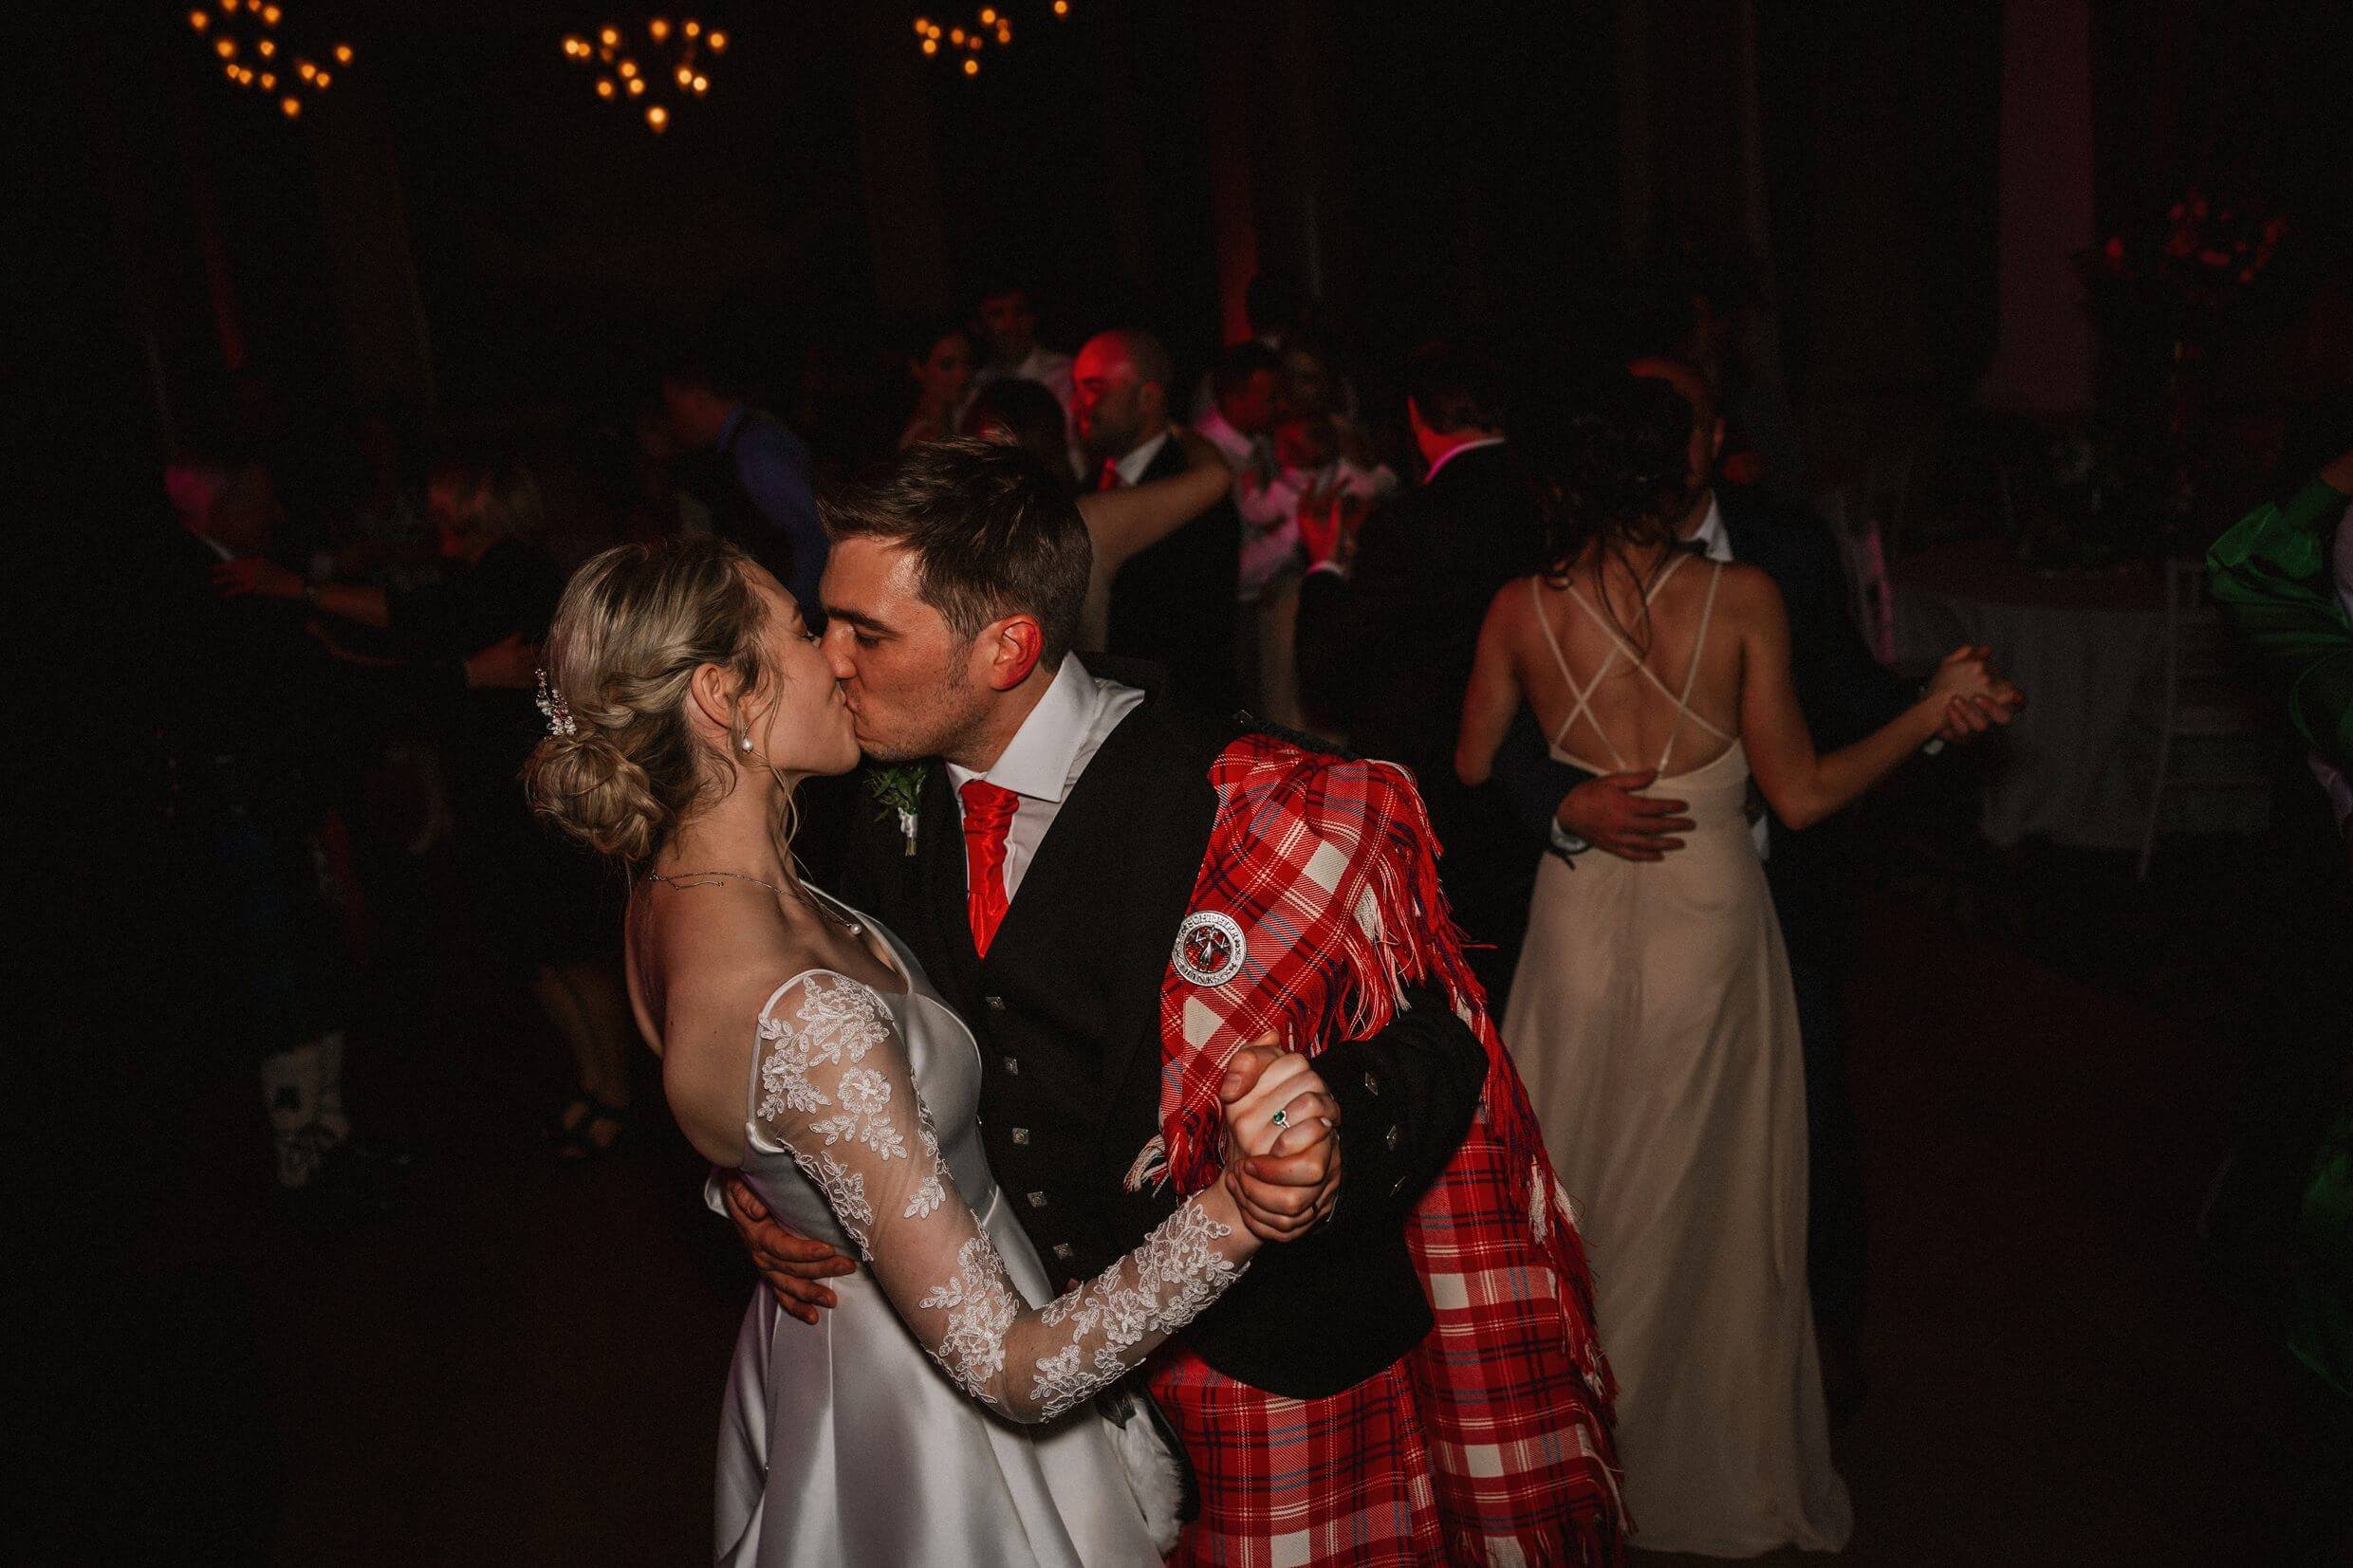 the bride and groom kiss as they dance at their evening reception at the balmoral hotel edinburgh wedding venue in scotland